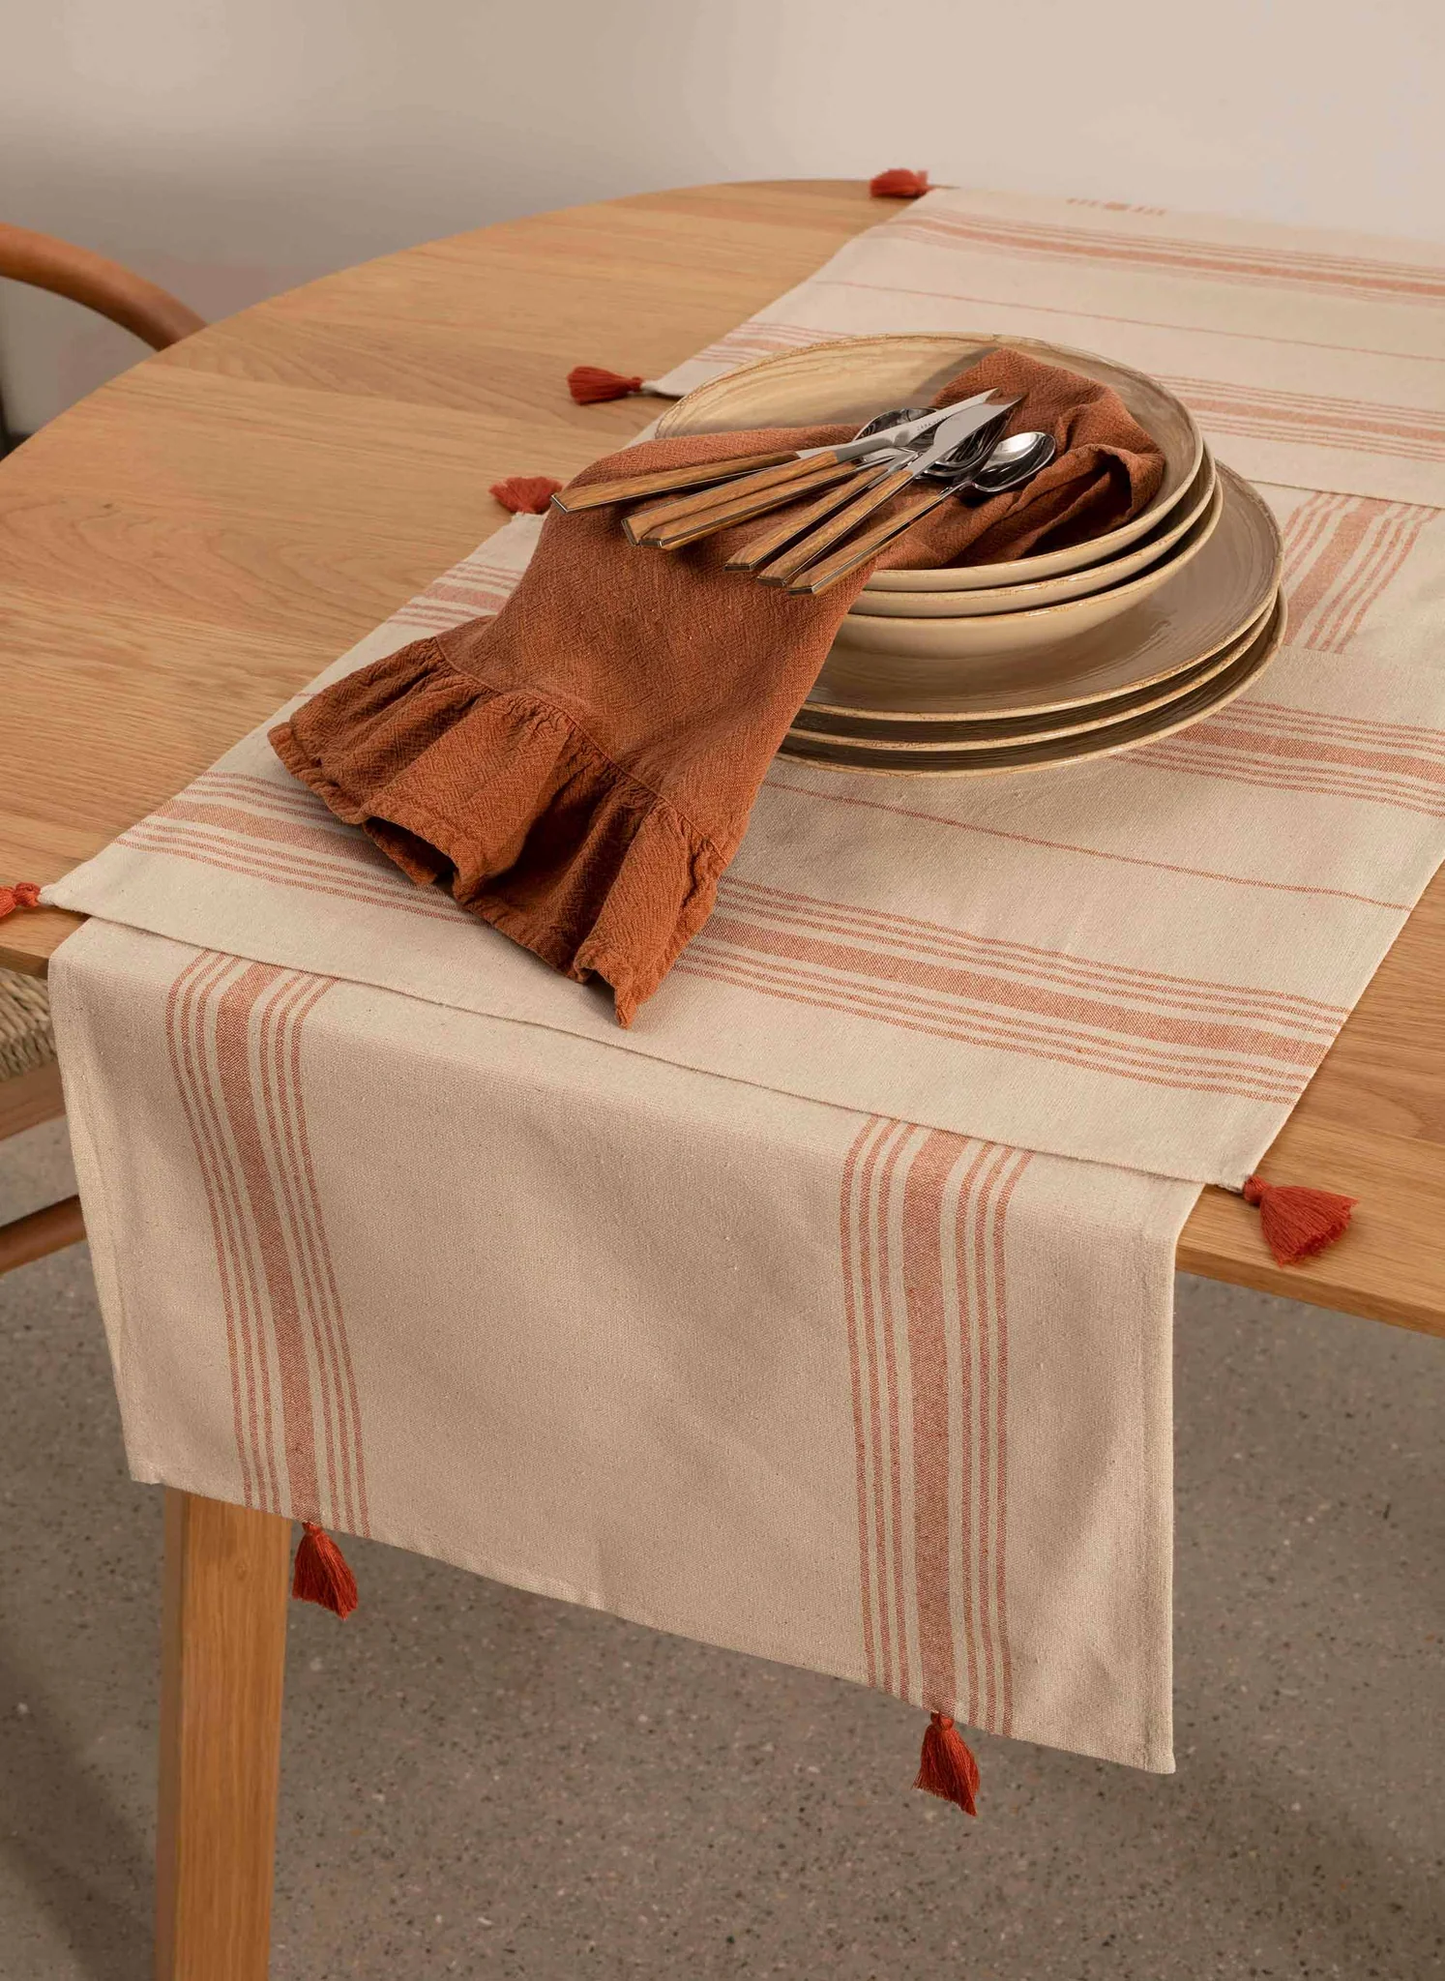 Cinnamon Placemats, Set of 4